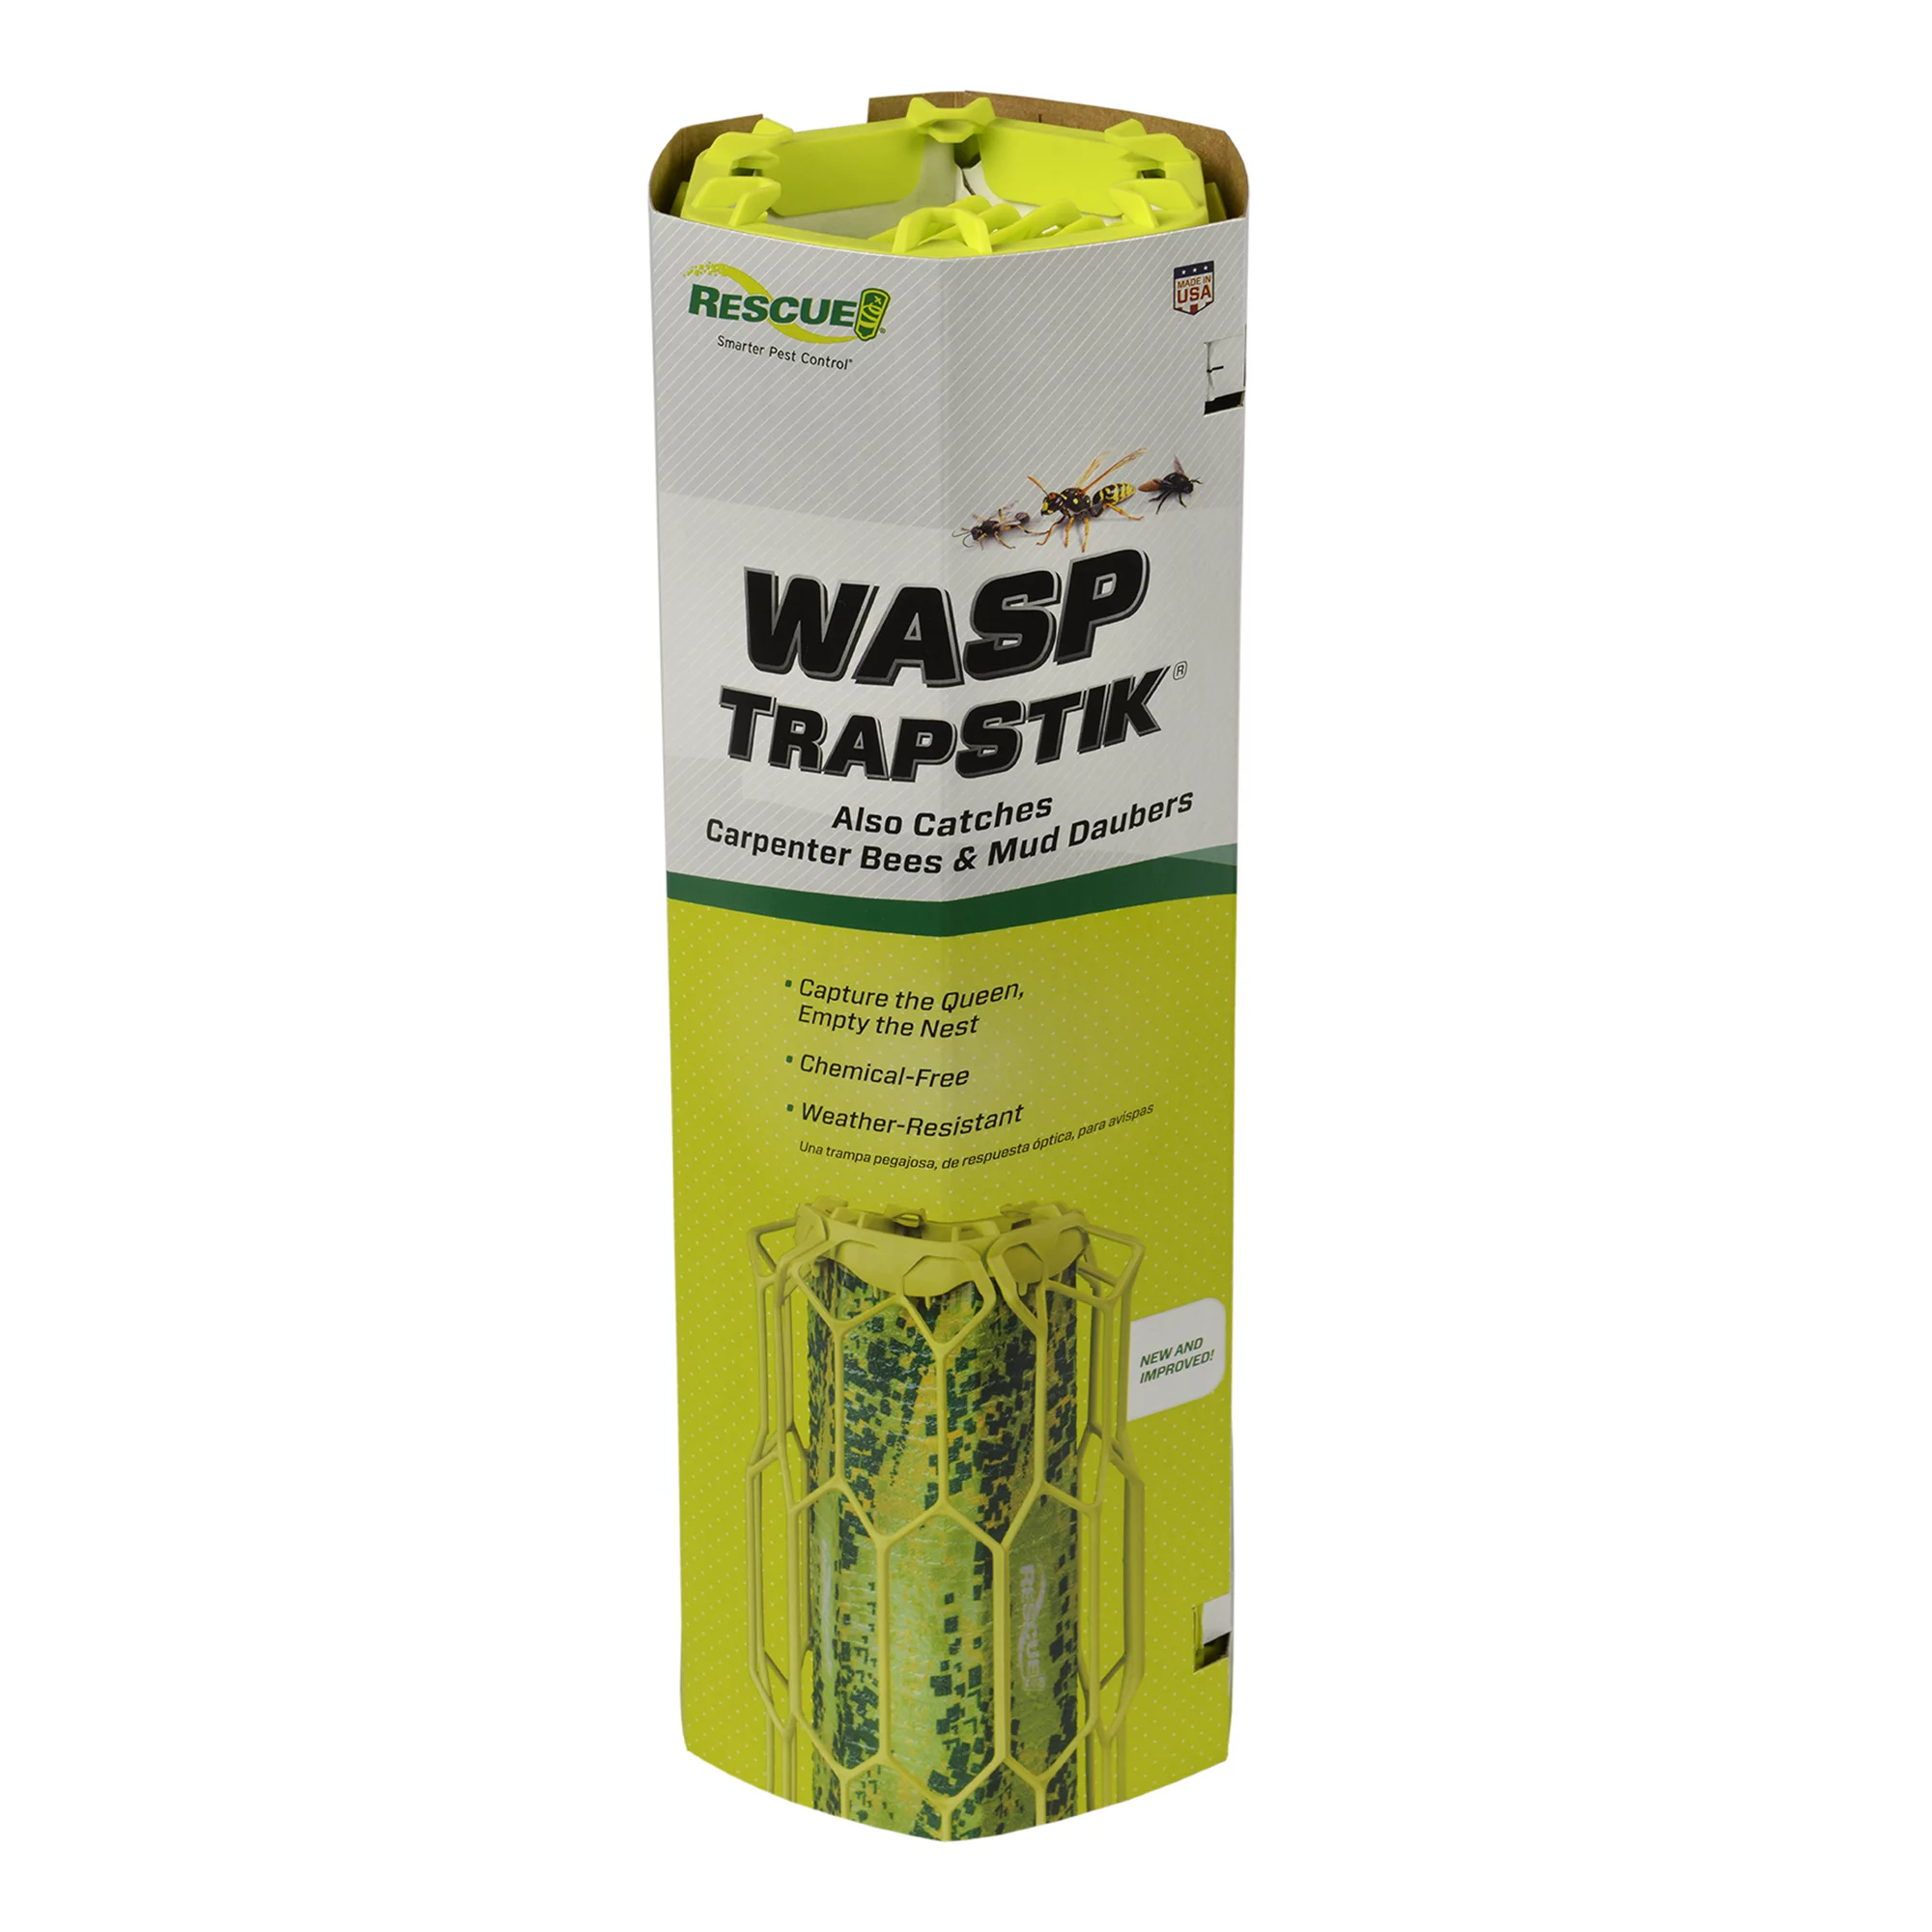 RESCUE! Wasp Trap Stick, Wasp and Yellowjacket Catcher, 1 Pack - Walmart.com $9.43